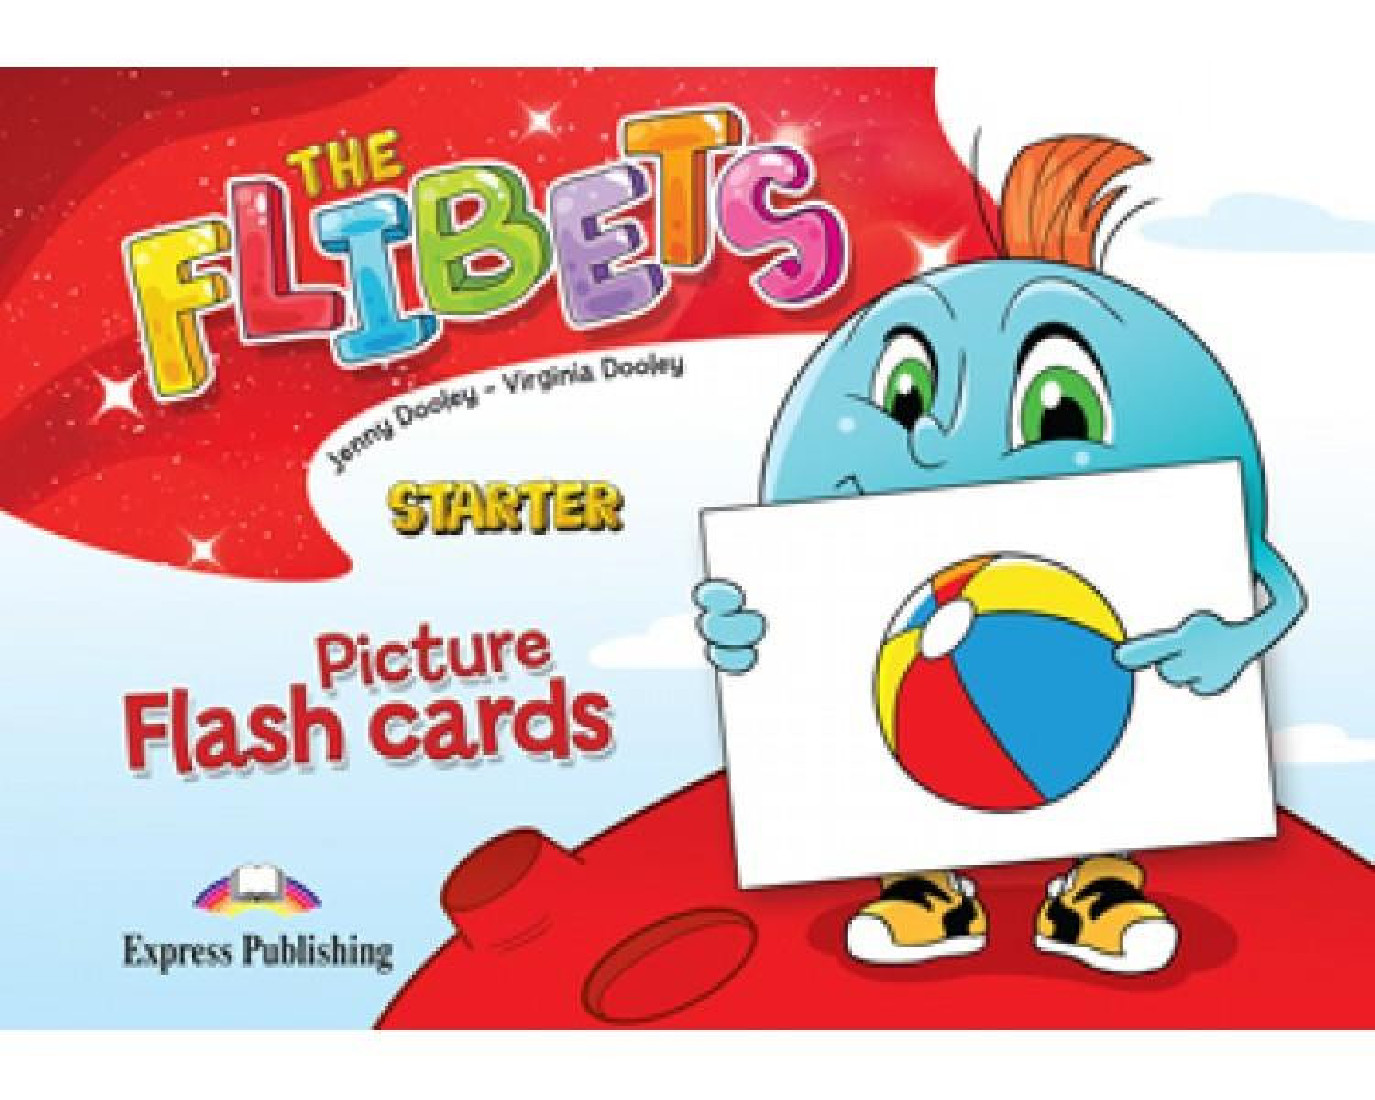 THE FLIBETS STARTER FLASHCARDS